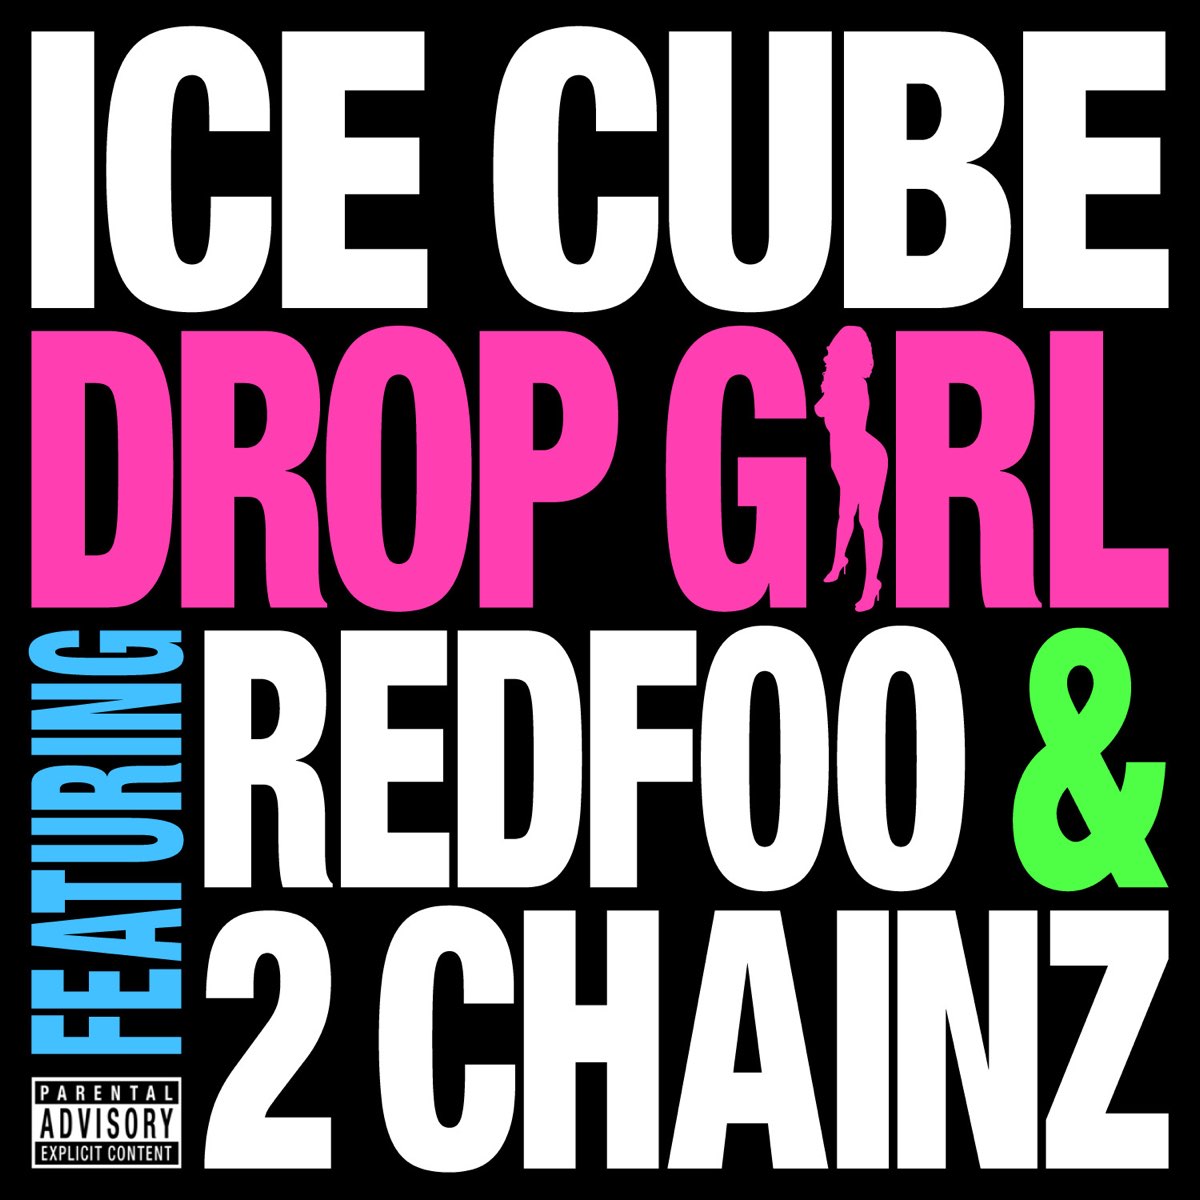 Cube feat. Ice Cube crowded. Ice Cube 2 Chainz. Music Cube. Петух Cube Drop out.